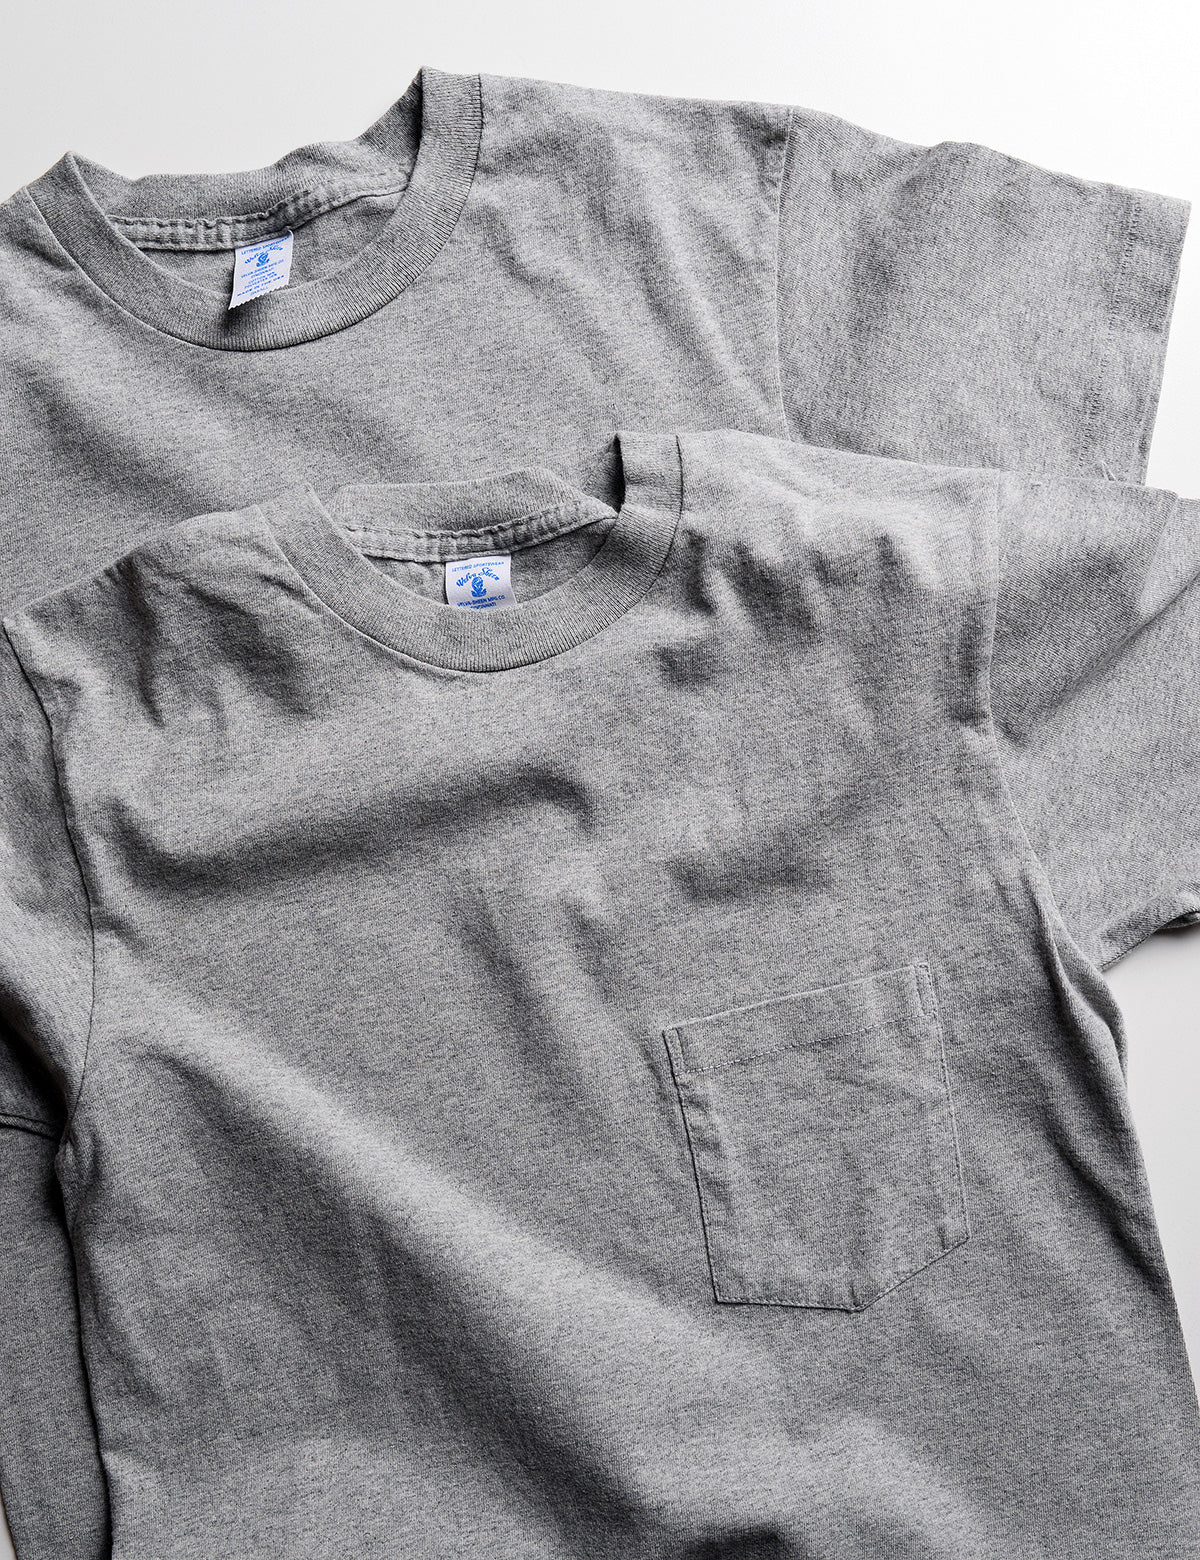 Slightly cropped and casual photo of 2-Pack Short Sleeve Pocket Tee in Heather Gray